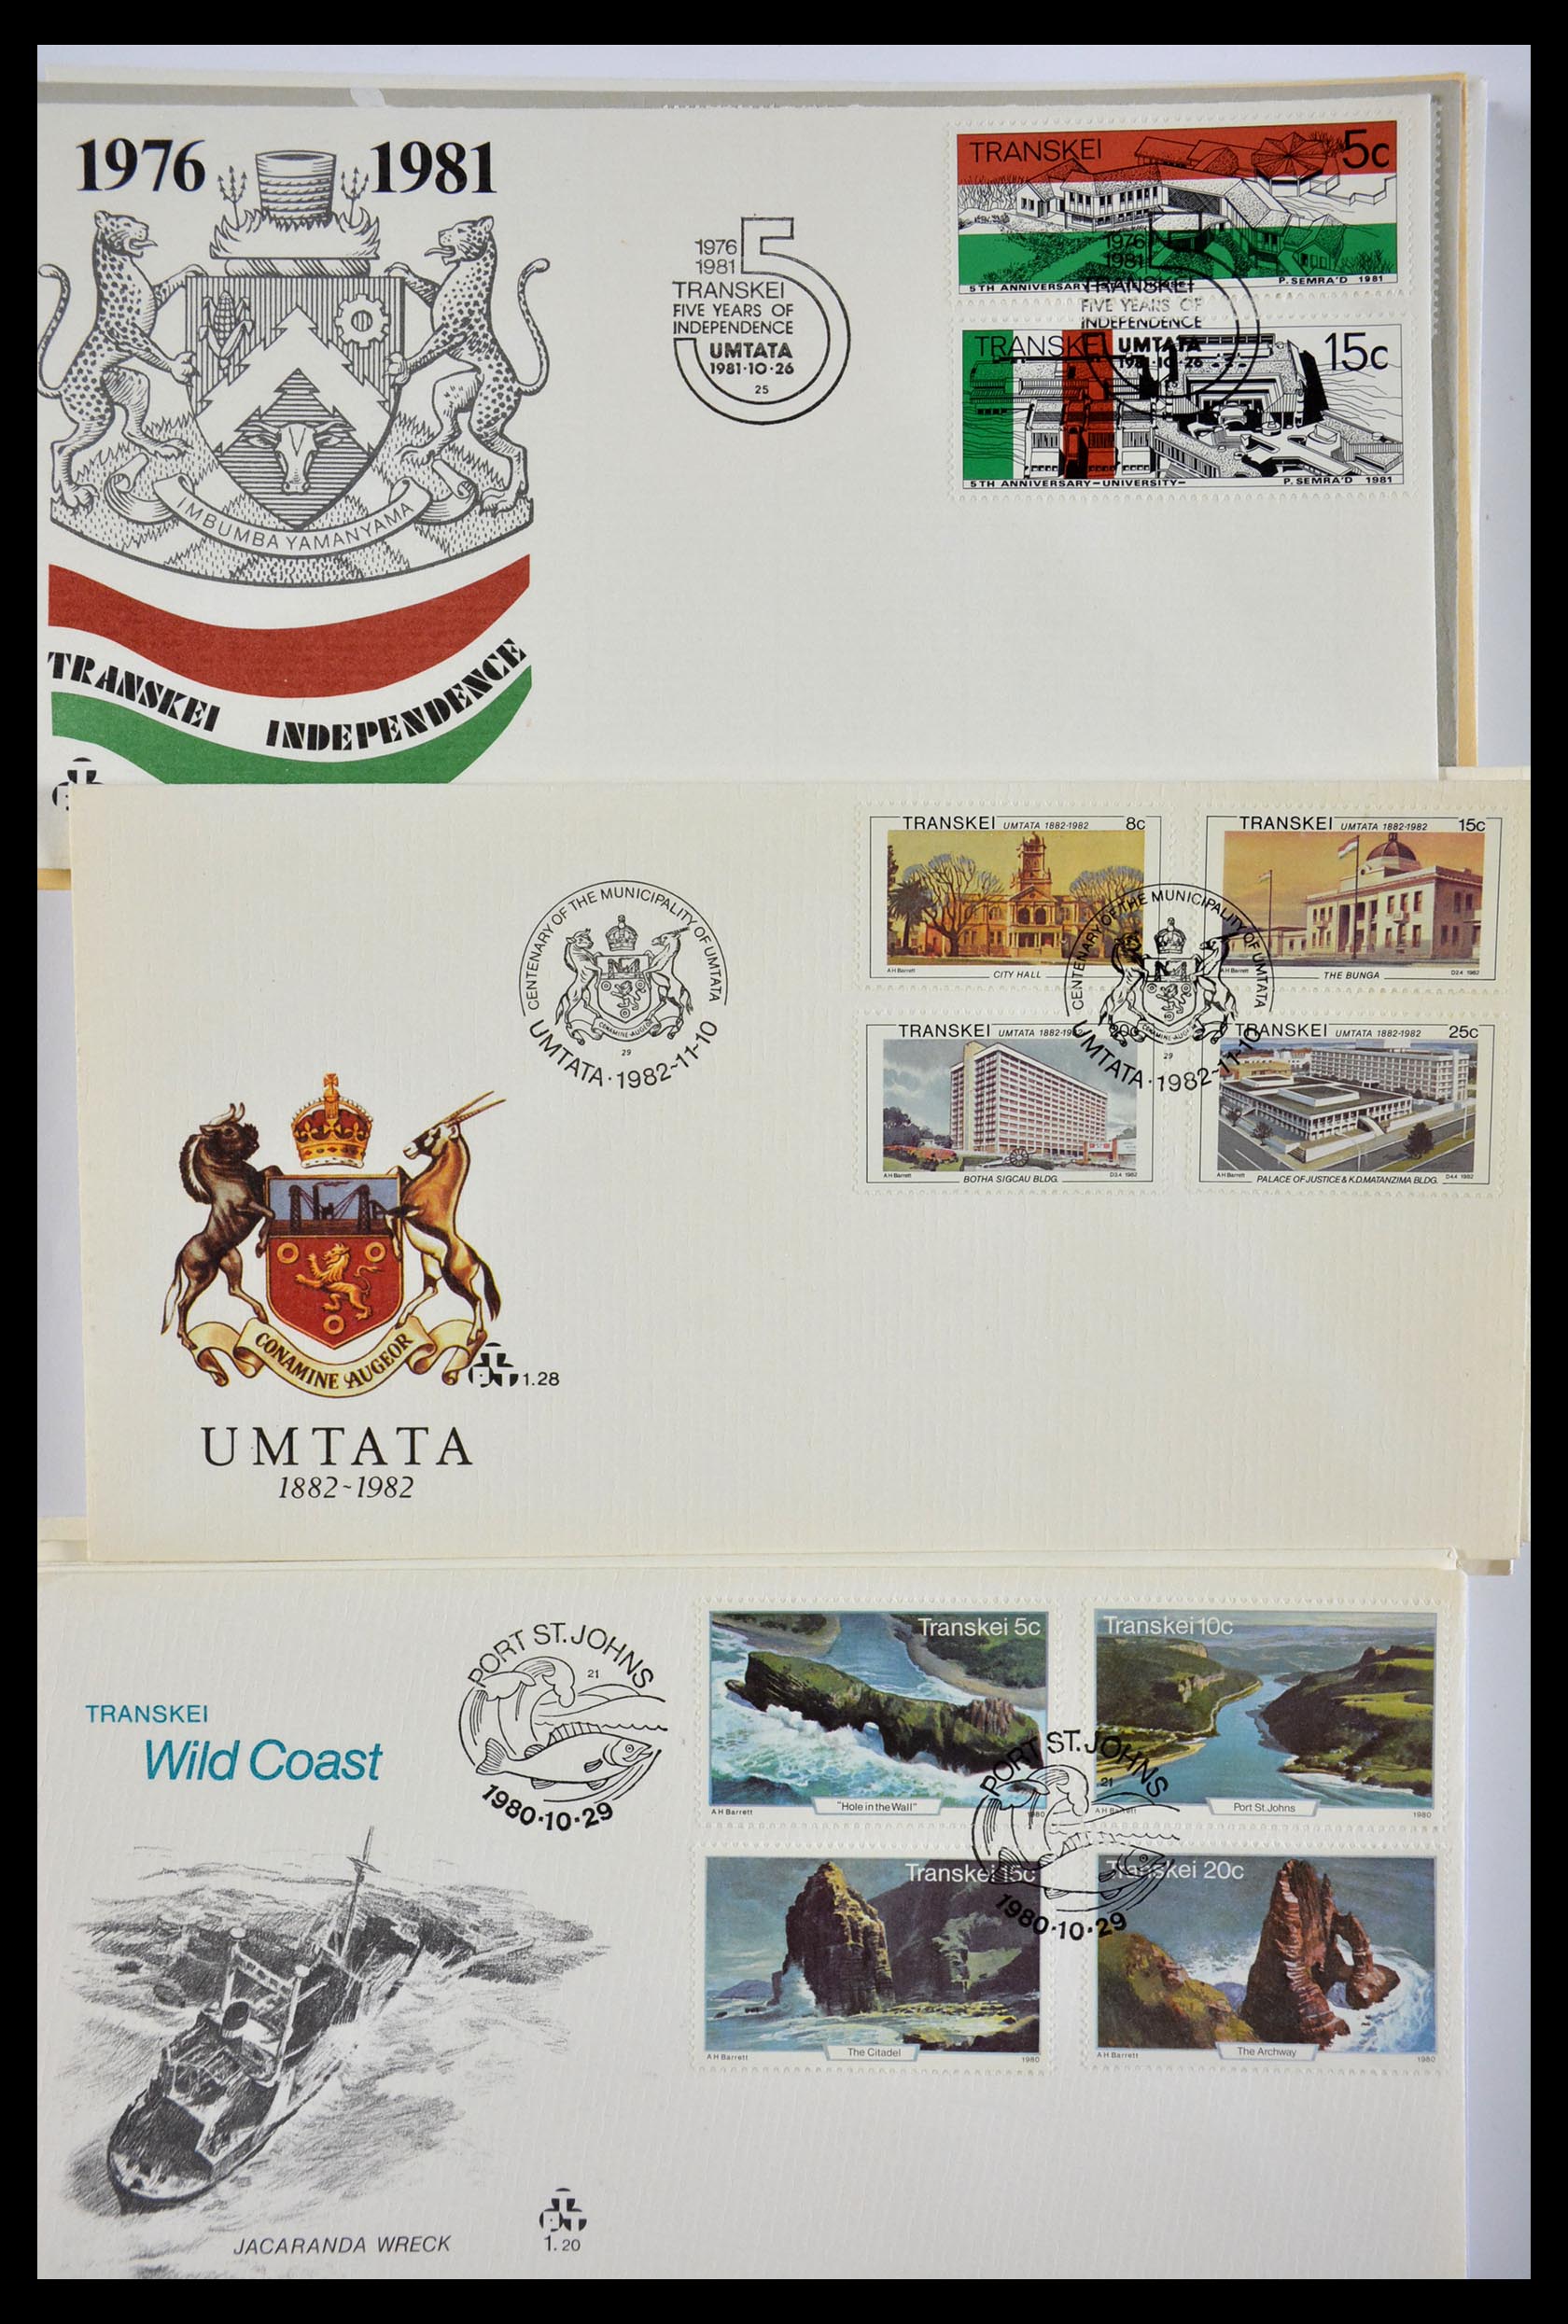 29356 553 - 29356 South Africa homelands first day covers 1979-1991.